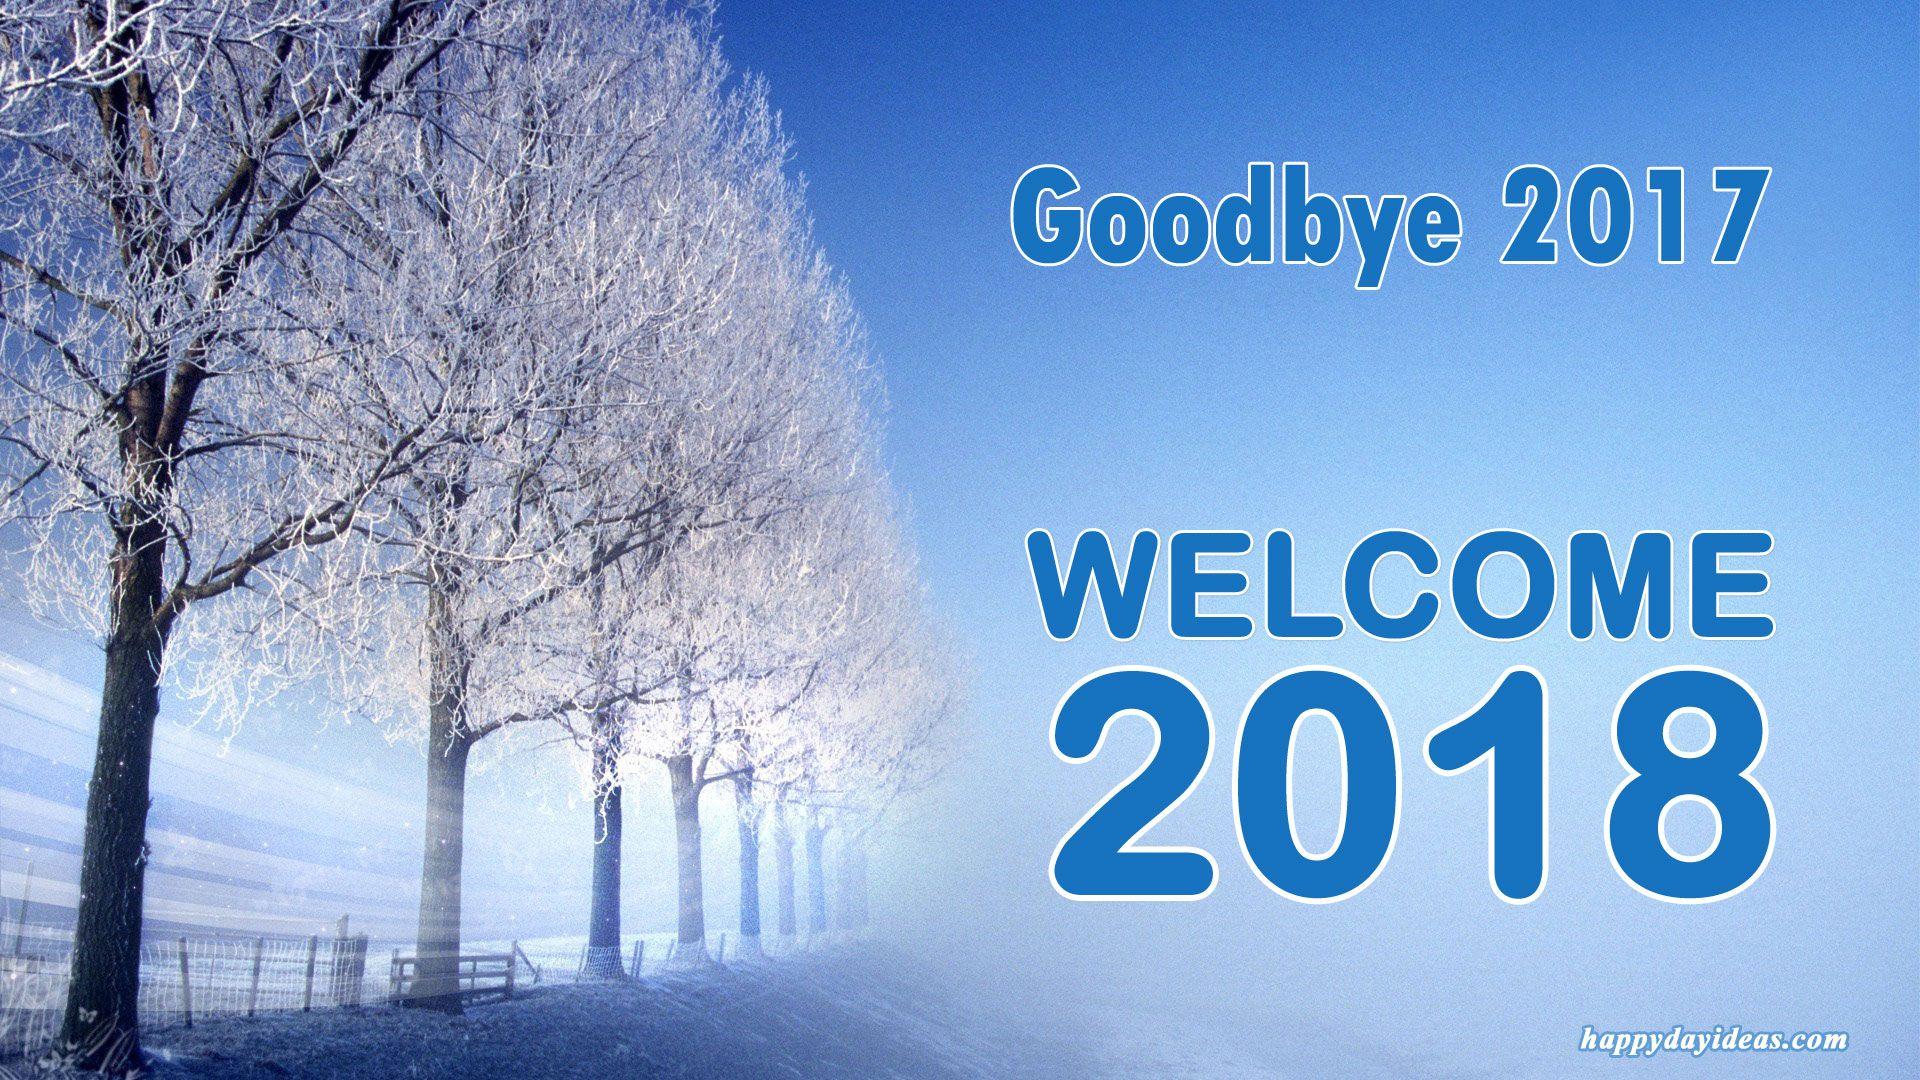 Goodbye 2017 Welcome - wallpaper and quotes